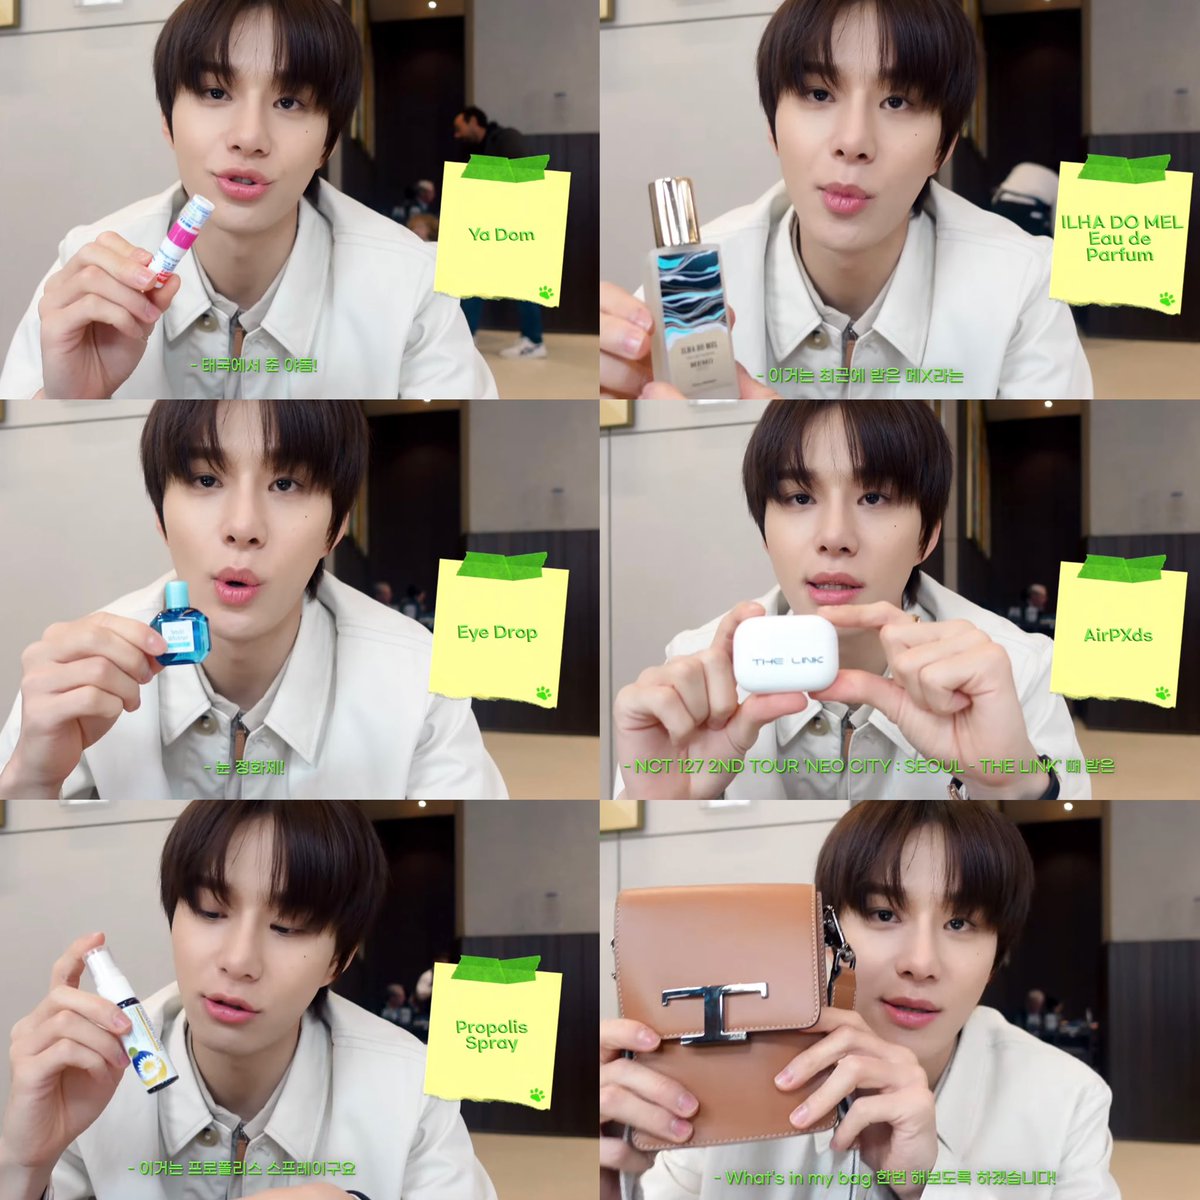 What’s in Jungwoo’s T Timeless bag~

‘What’s in my bag’ session

1. Card Holder Light Blue
2. T Timeless Bracelet 
3. Lip Balm
4. Philosykos Perfume
5. Nail Clippers 
6. Ya Dom
7. Eye Drop
8. Propolis Spray
9. AirPods
10. ILHA DO MEL Eau de Parfum